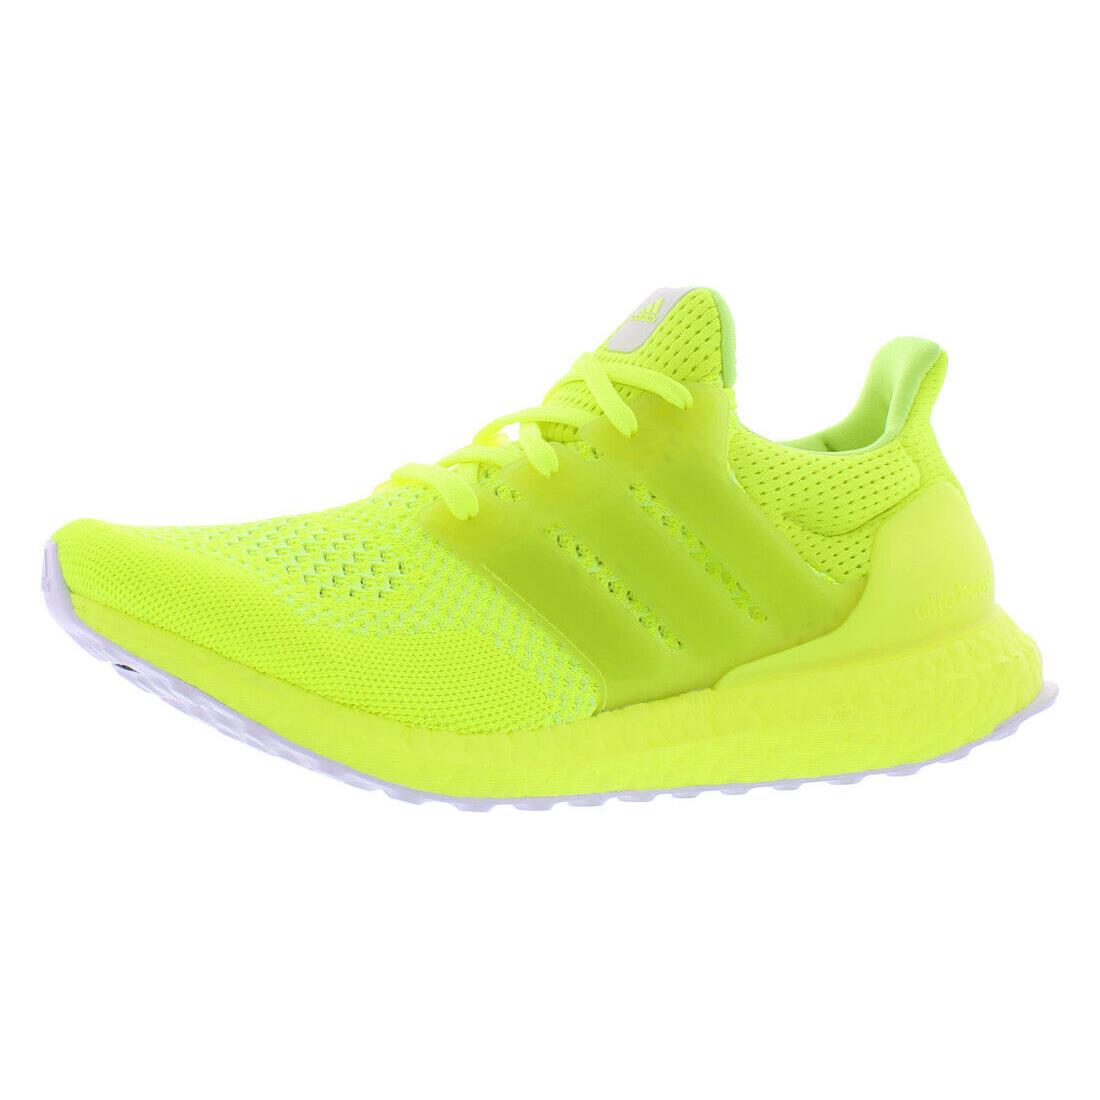 Adidas shoes UltraBoost DNA - Solar Yellow / Solar Yellow / Hi-Res Yellow , Core Black/Core Black/Footwear White Manufacturer 4